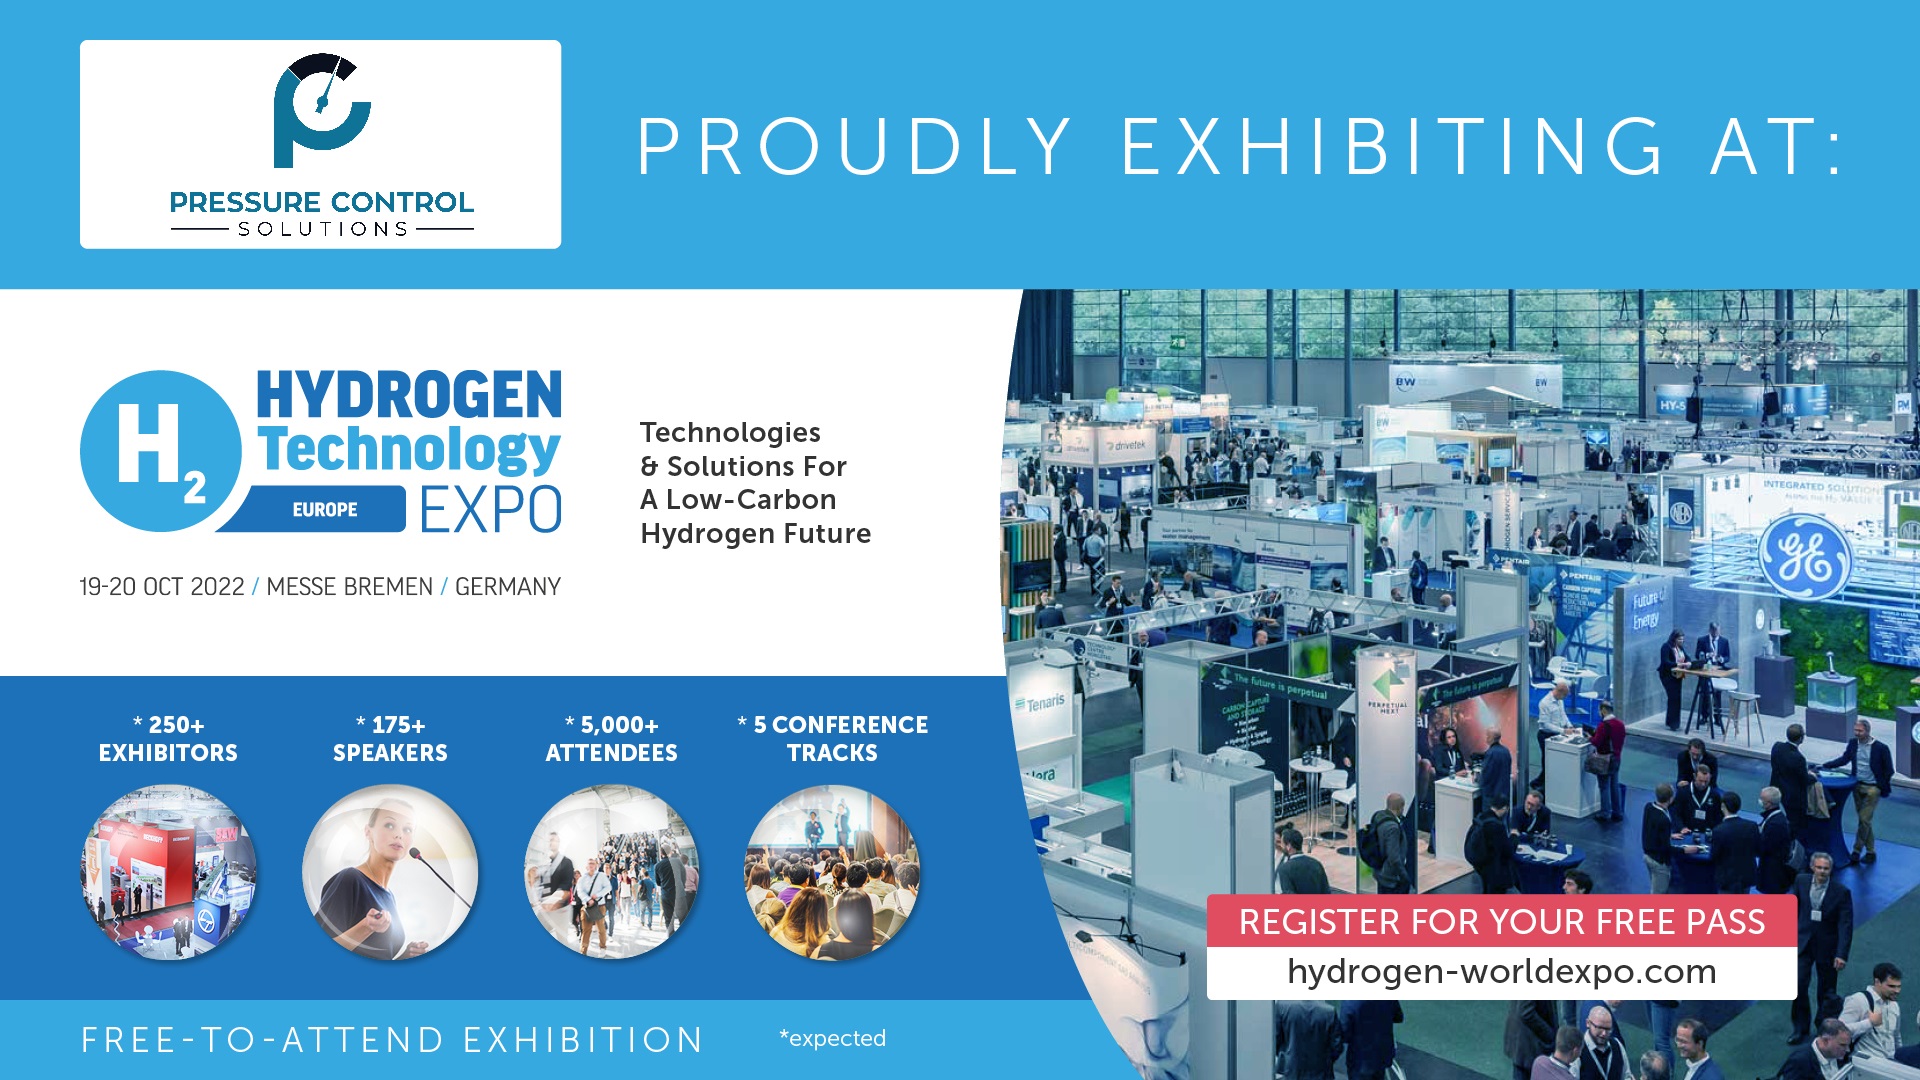 PCS is going to Hydrogen Technology Expo Europe